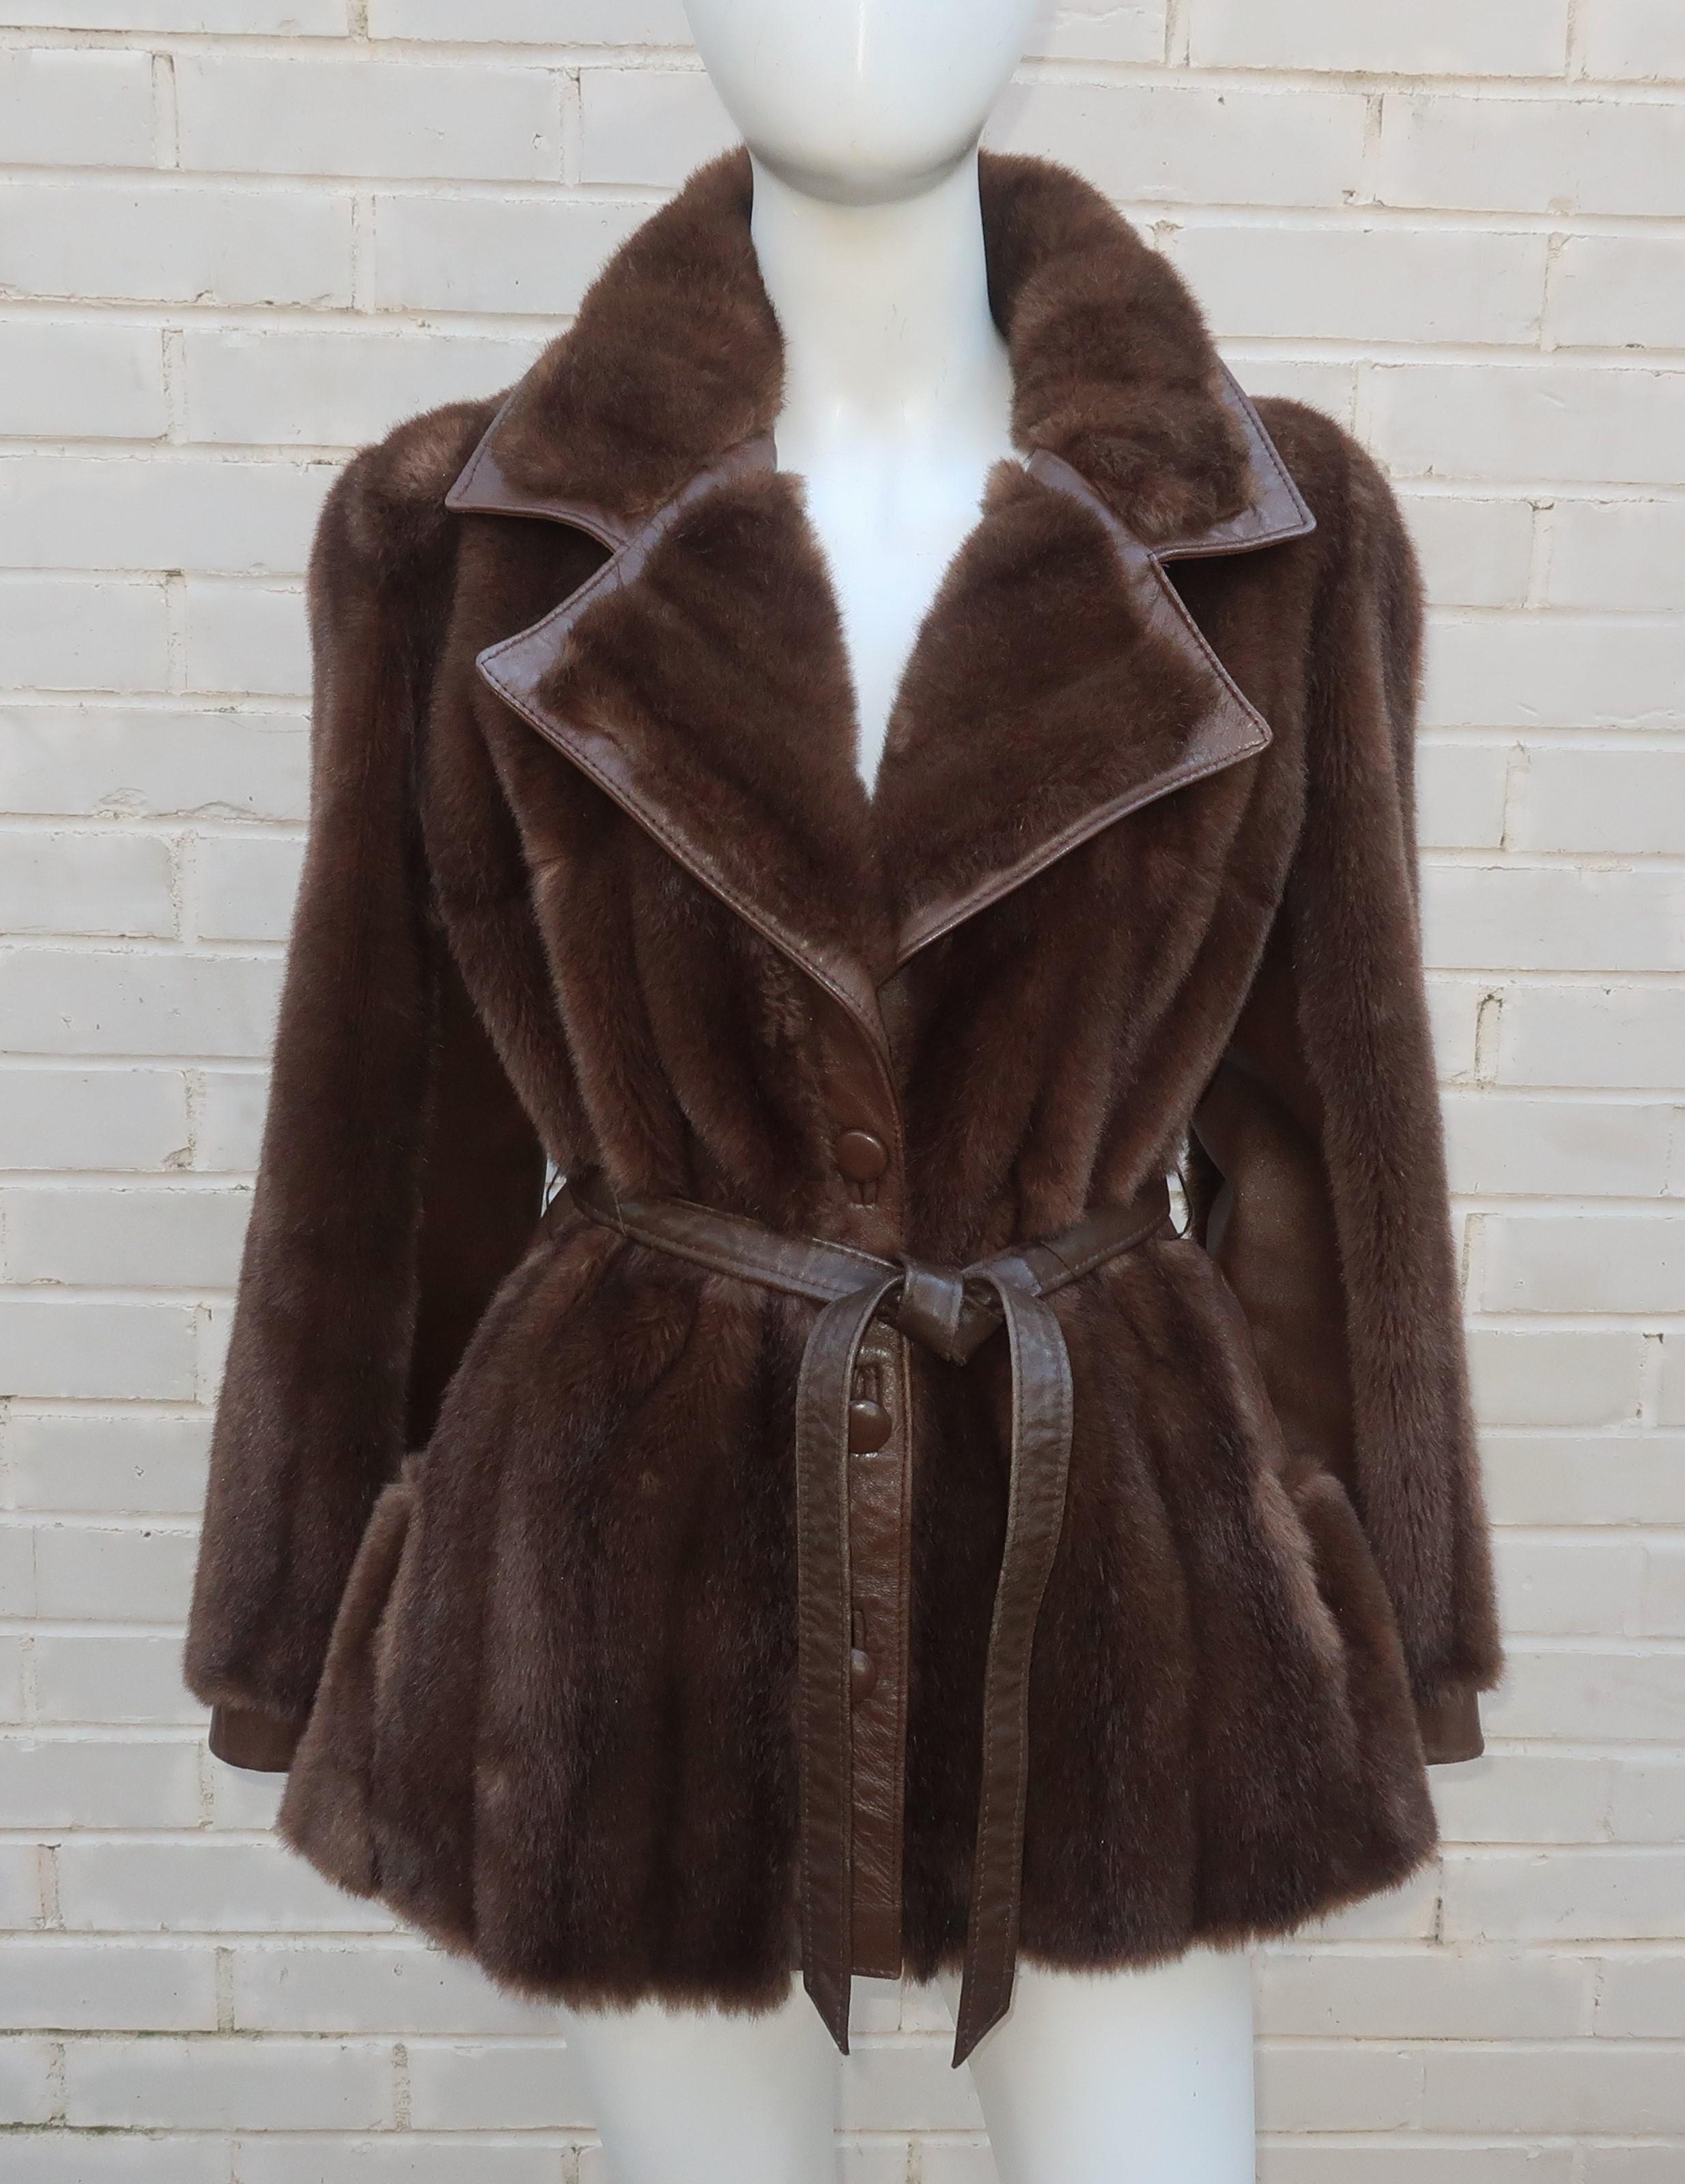 Faux and Fabulous!  1960's Lilli Ann brown faux fur jacket with leather details and trim.  This mod design was made in England and has a cozy style that is perfect for topping off casual ensembles.  The faux fur is an acrylic cotton blend and looks